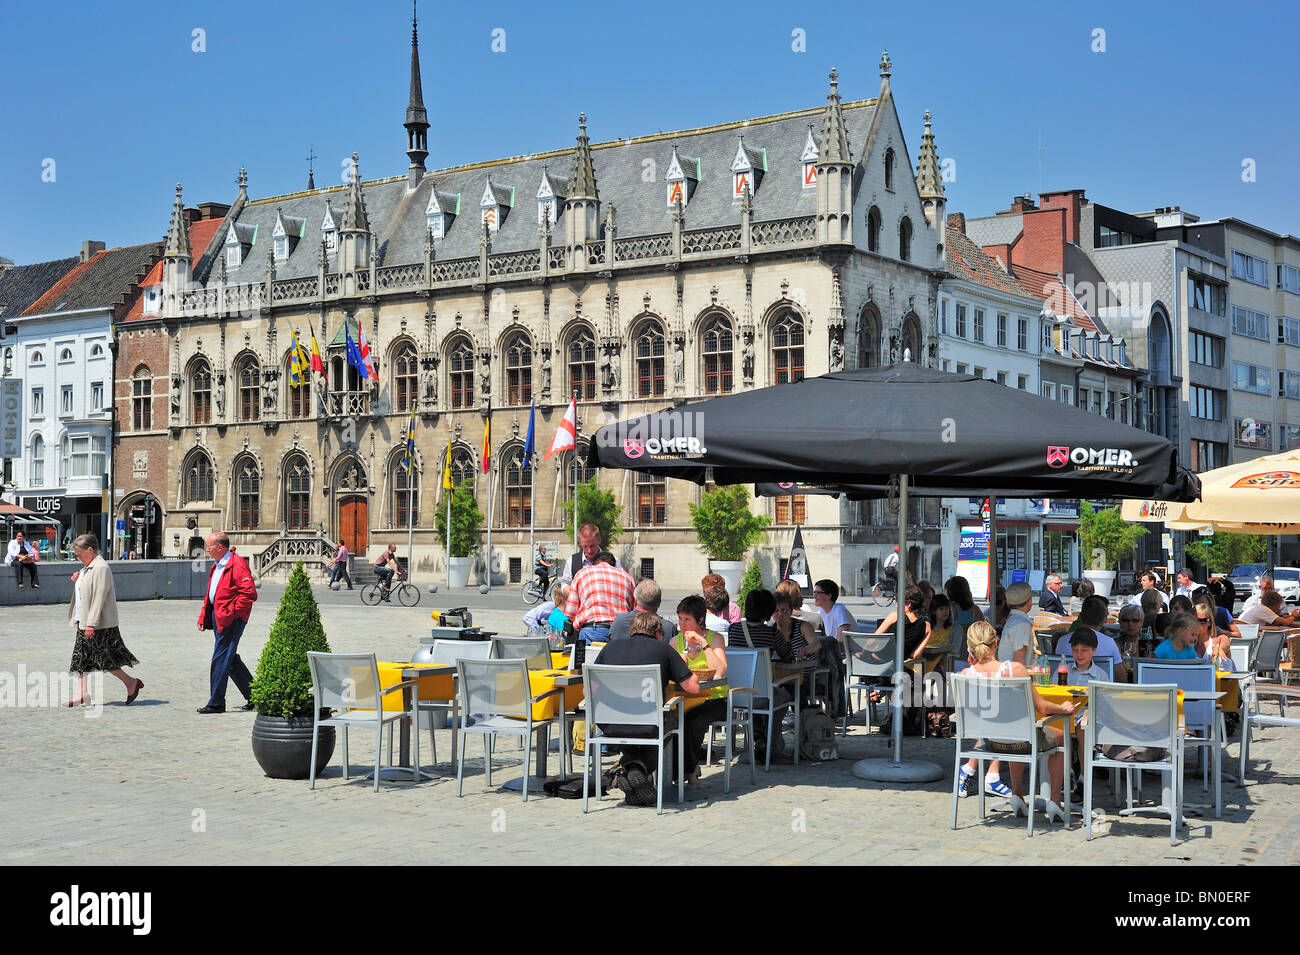 City Hall and tourists enjoying a drink at pavement café on the main square, Kortrijk, Belgium Stock Photo